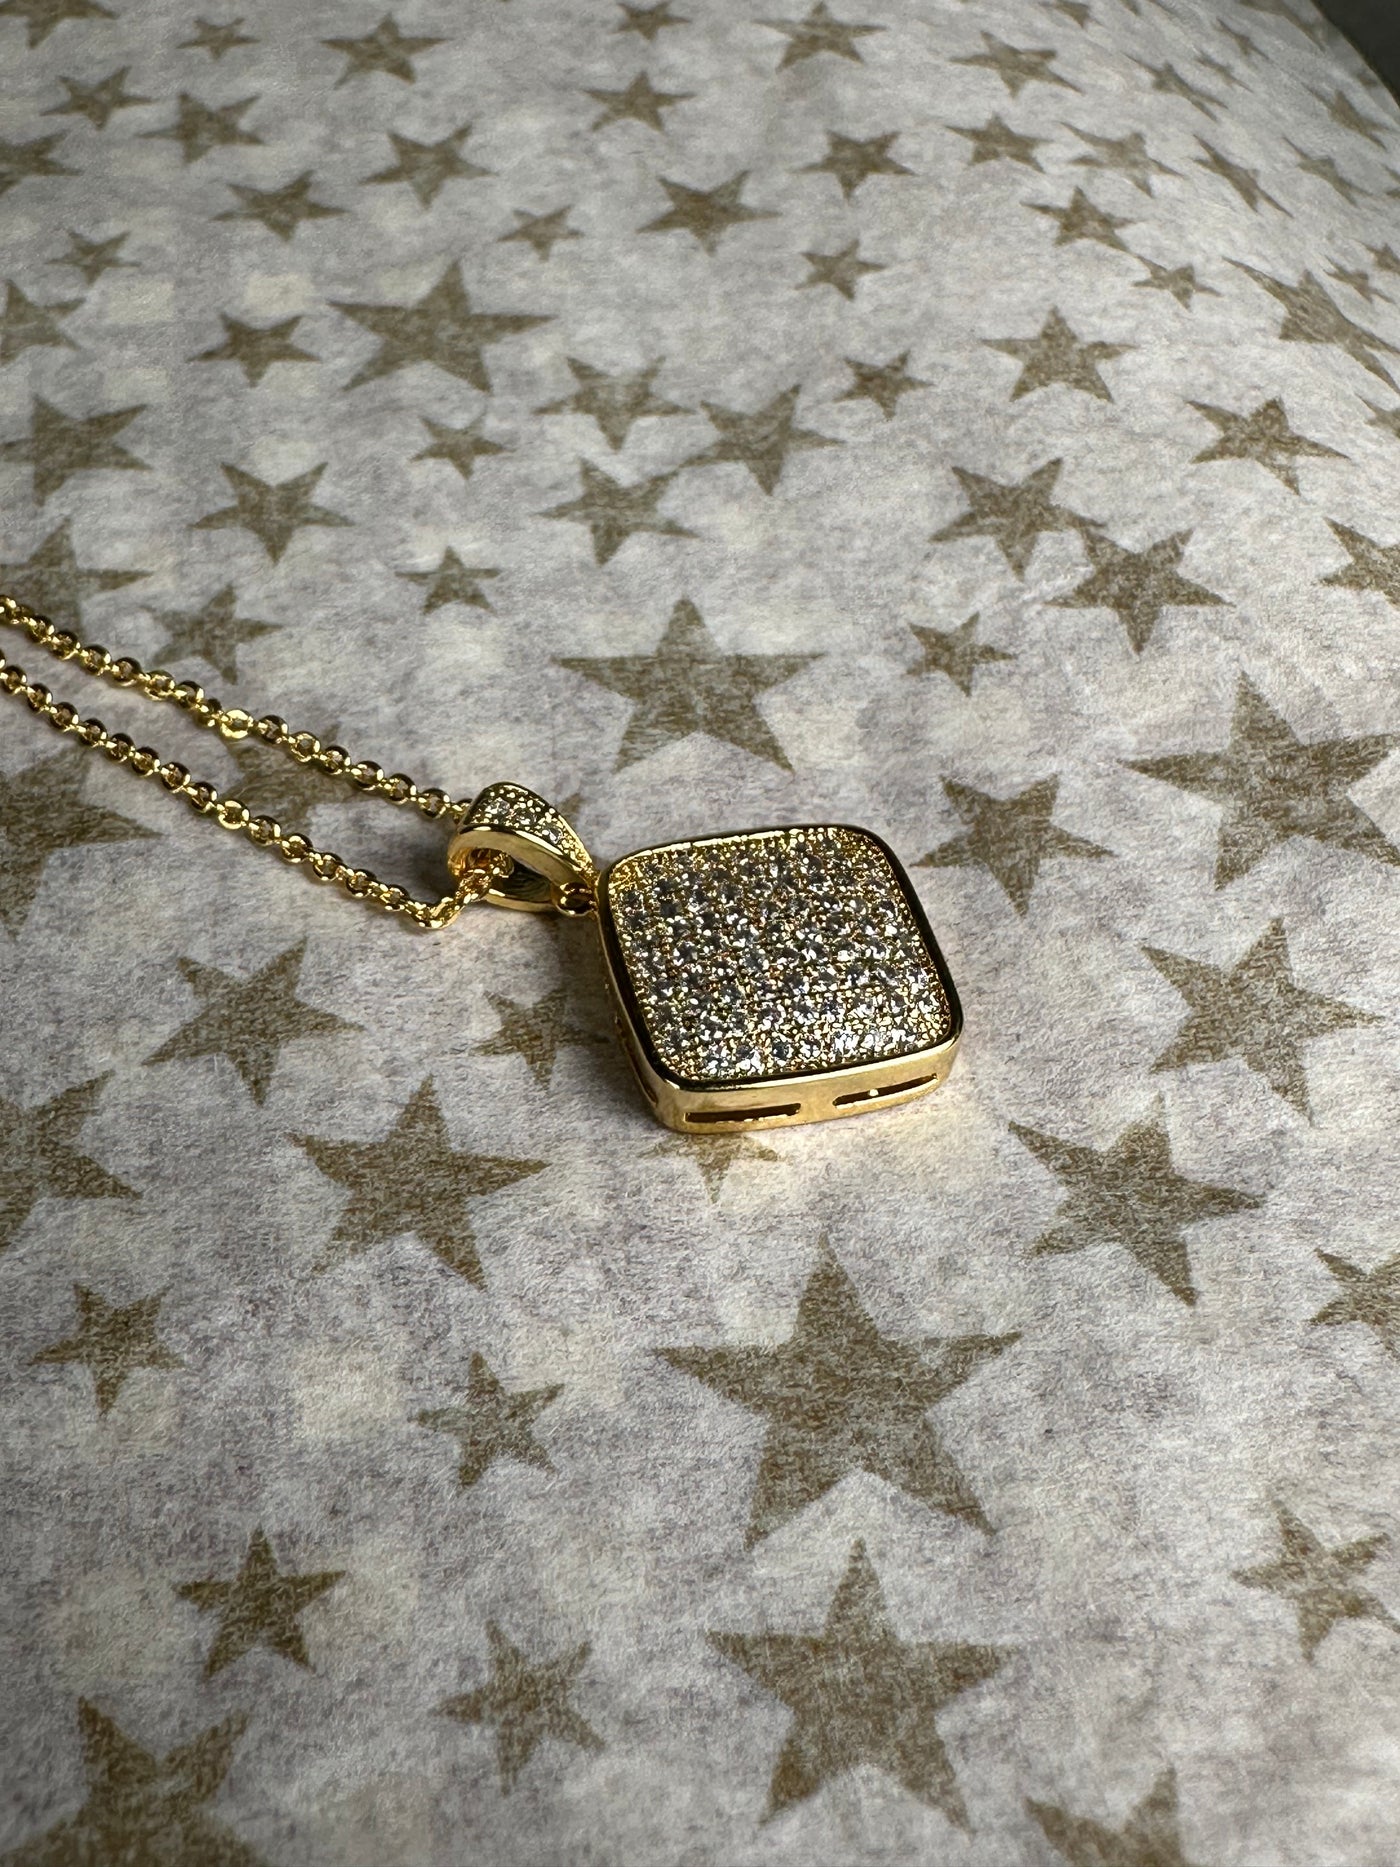 Pave Set Cubic Zirconia Square Pendant Necklace in Yellow Gold Tone